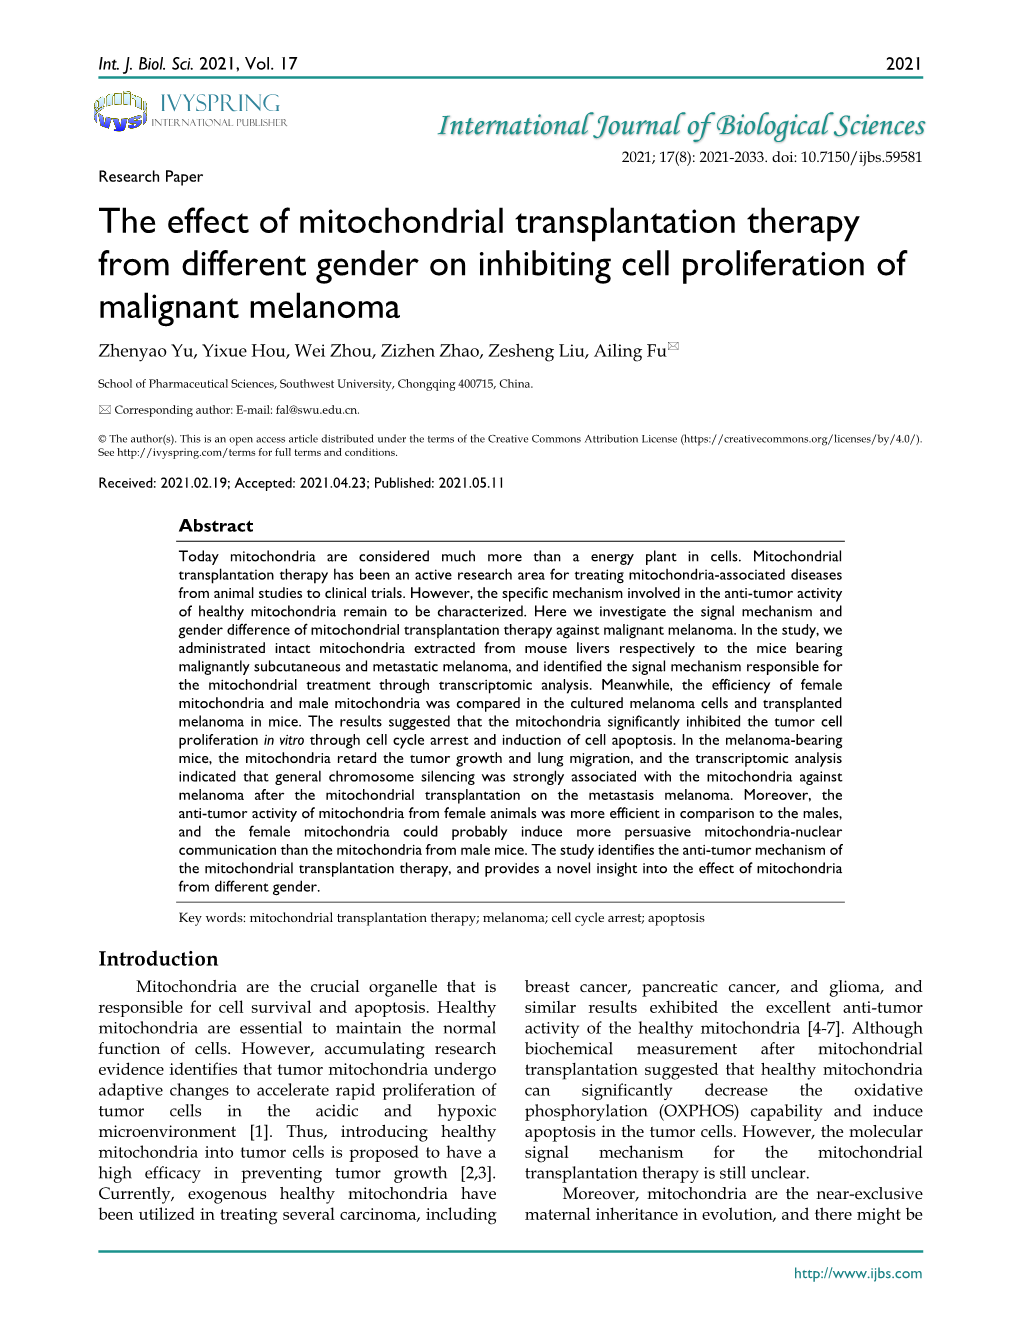 The Effect of Mitochondrial Transplantation Therapy From